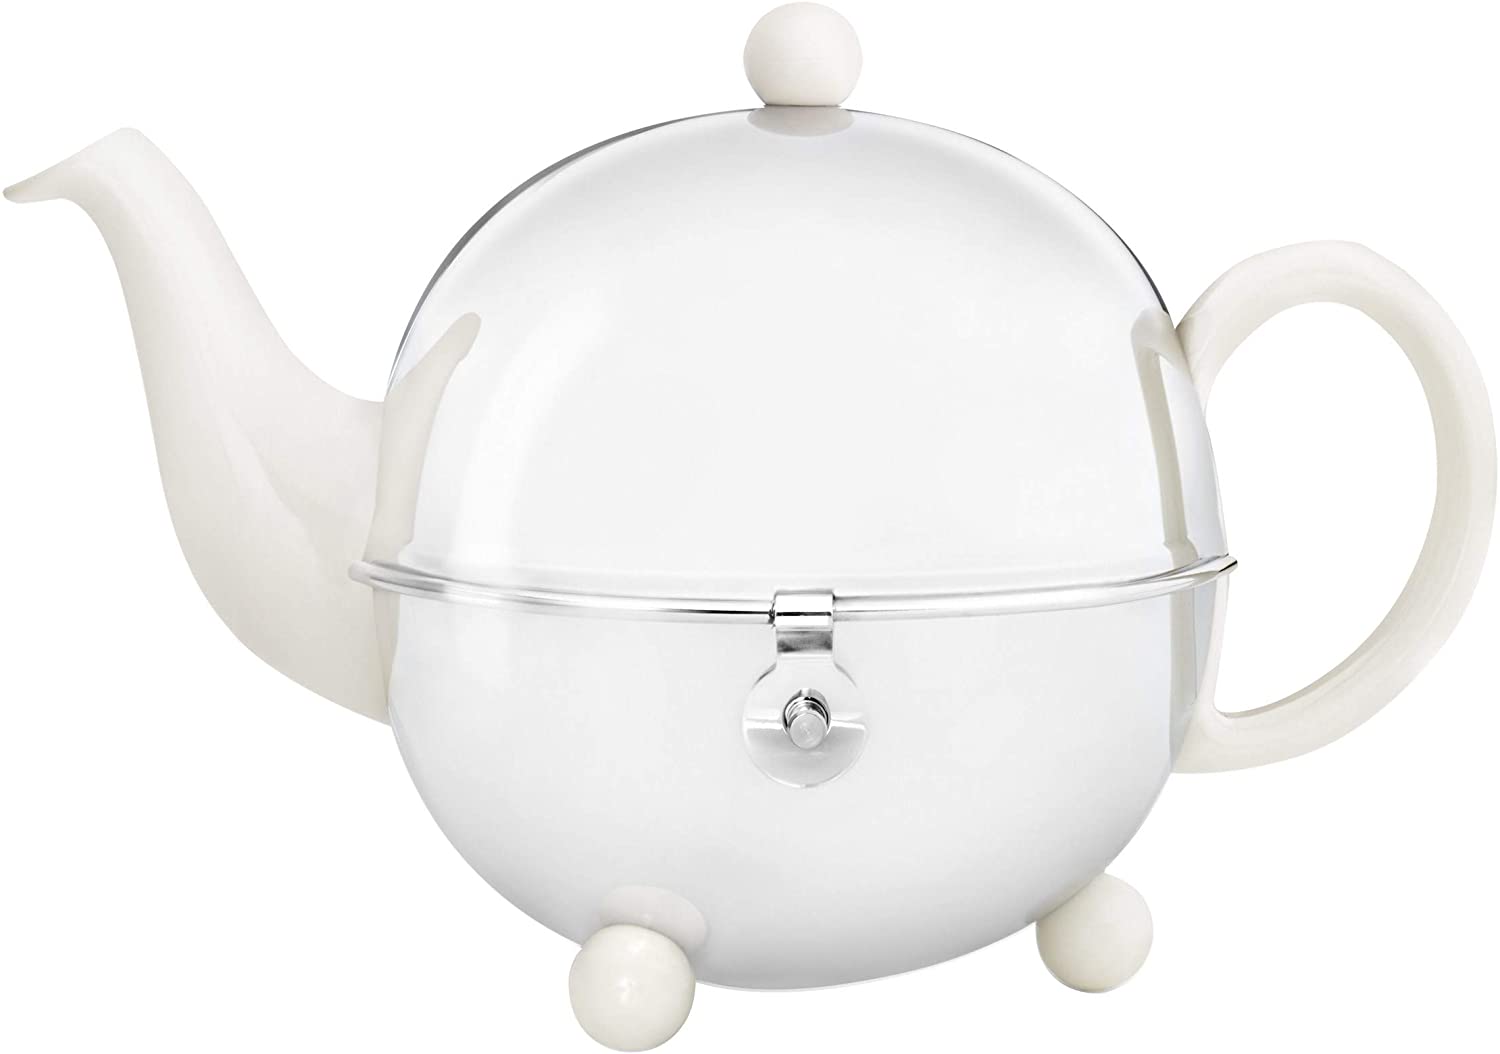 Bredemeijer 0.9 L Ceramics/ Stainless Steel Teapot Cosy, White